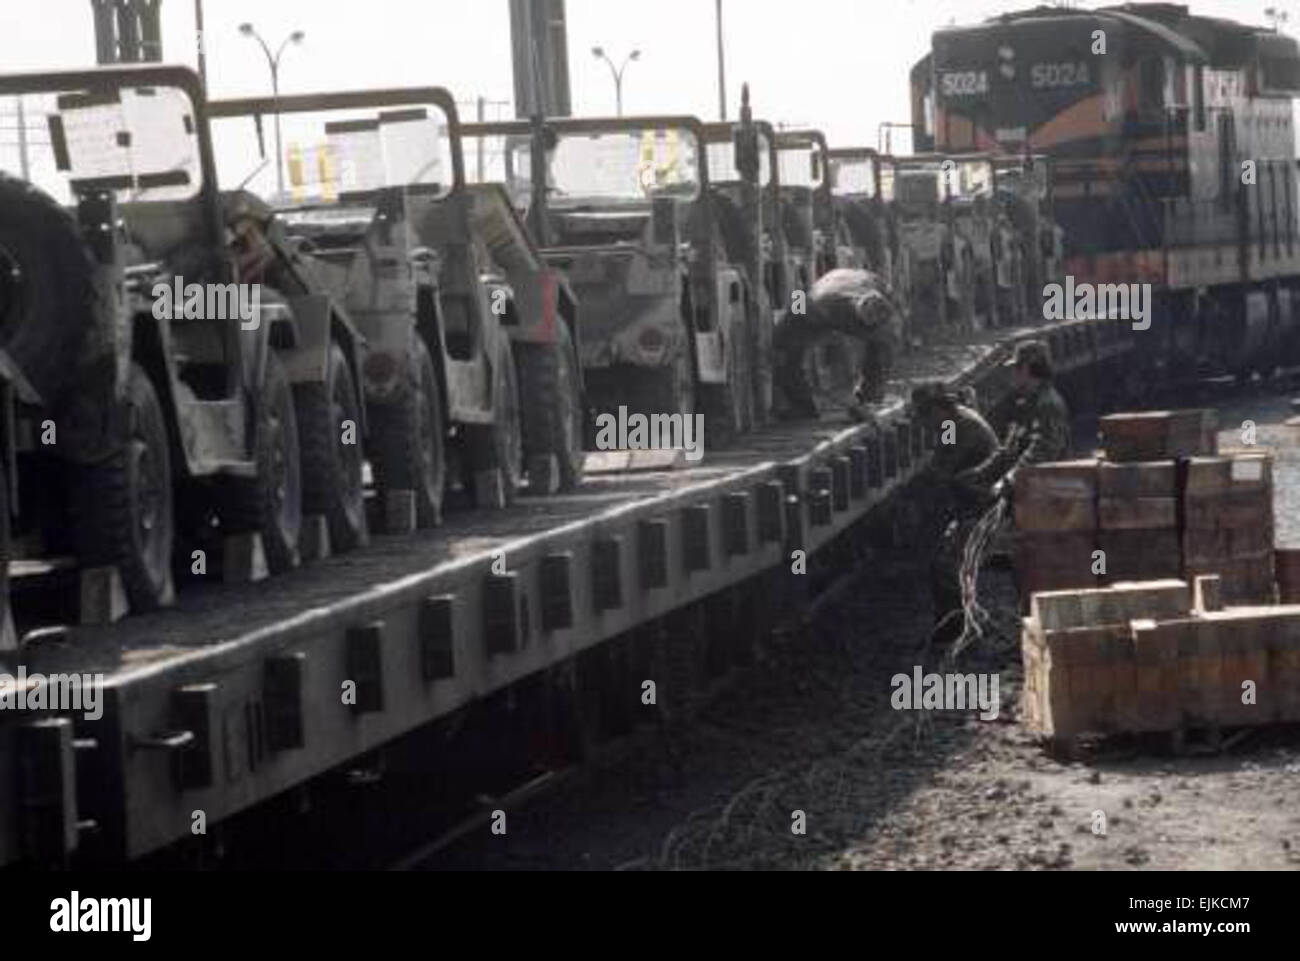 M151 light utility vehicles are tied down to railroad flatcars for shipment to the port at Pusan at the conclusion of the joint US/South Korean Exercise TEAM SPIRIT '87., Official : SSG ARNOLD W. KALMANSON, , PYONG TAEK, , REPUBLIC OF KOREA KOR  Operation: TEAM SPIRIT '87 Entered in system: 08/04/2006  Photographer: SSG ARNOLD W. KALMANSON  VIRIN: DA-ST-87-13012 Stock Photo